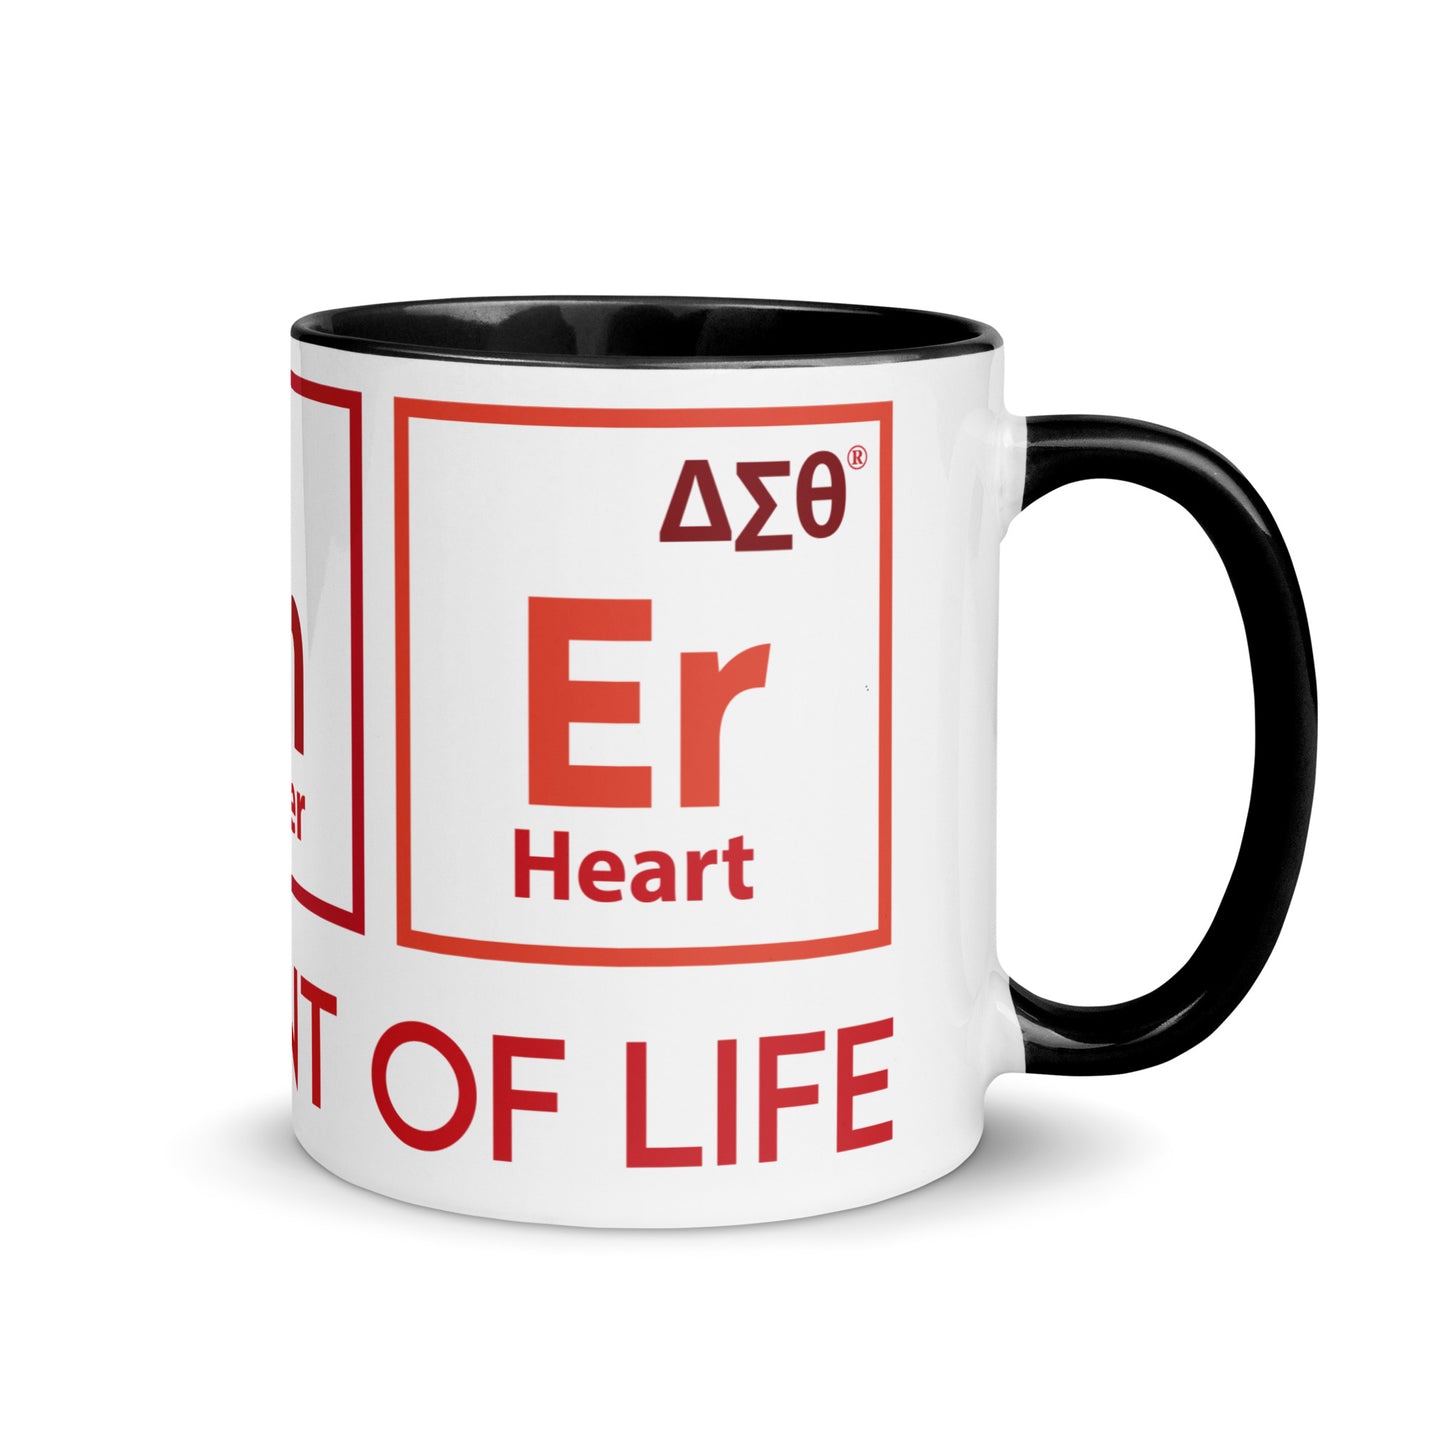 Delta Sigma Theta MoThER Mug with Color Inside